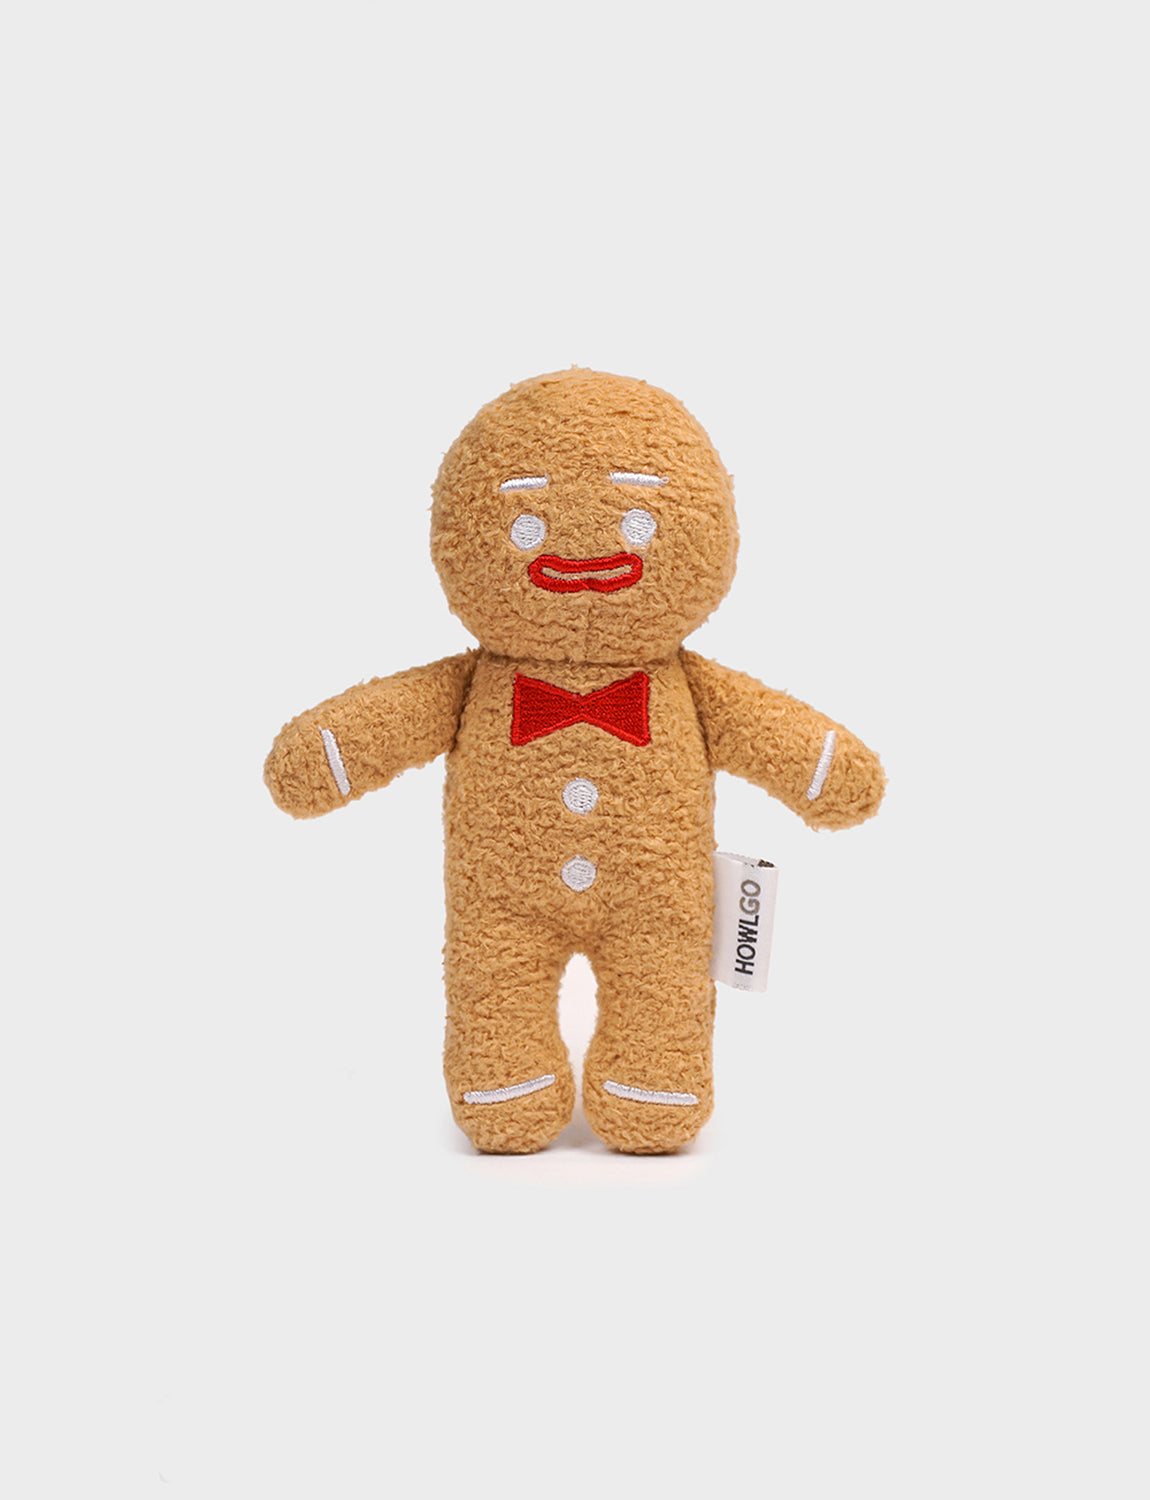 X-Mas Ginger Cookie Dog Toy